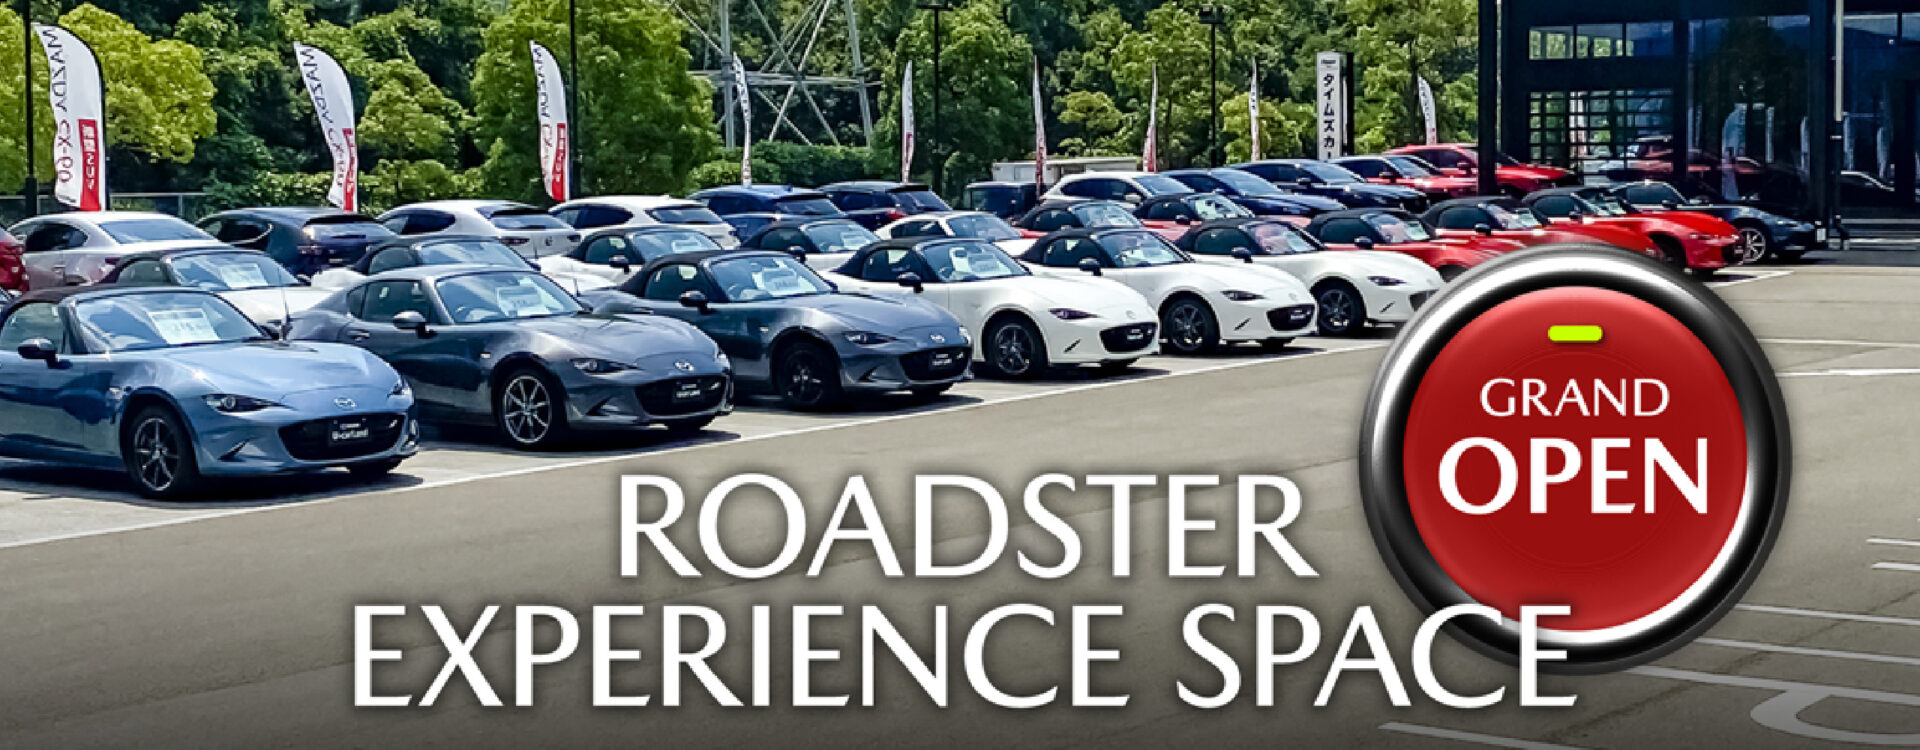 ROADSTER EXPERIENCE SPACE　GRAND OPEN